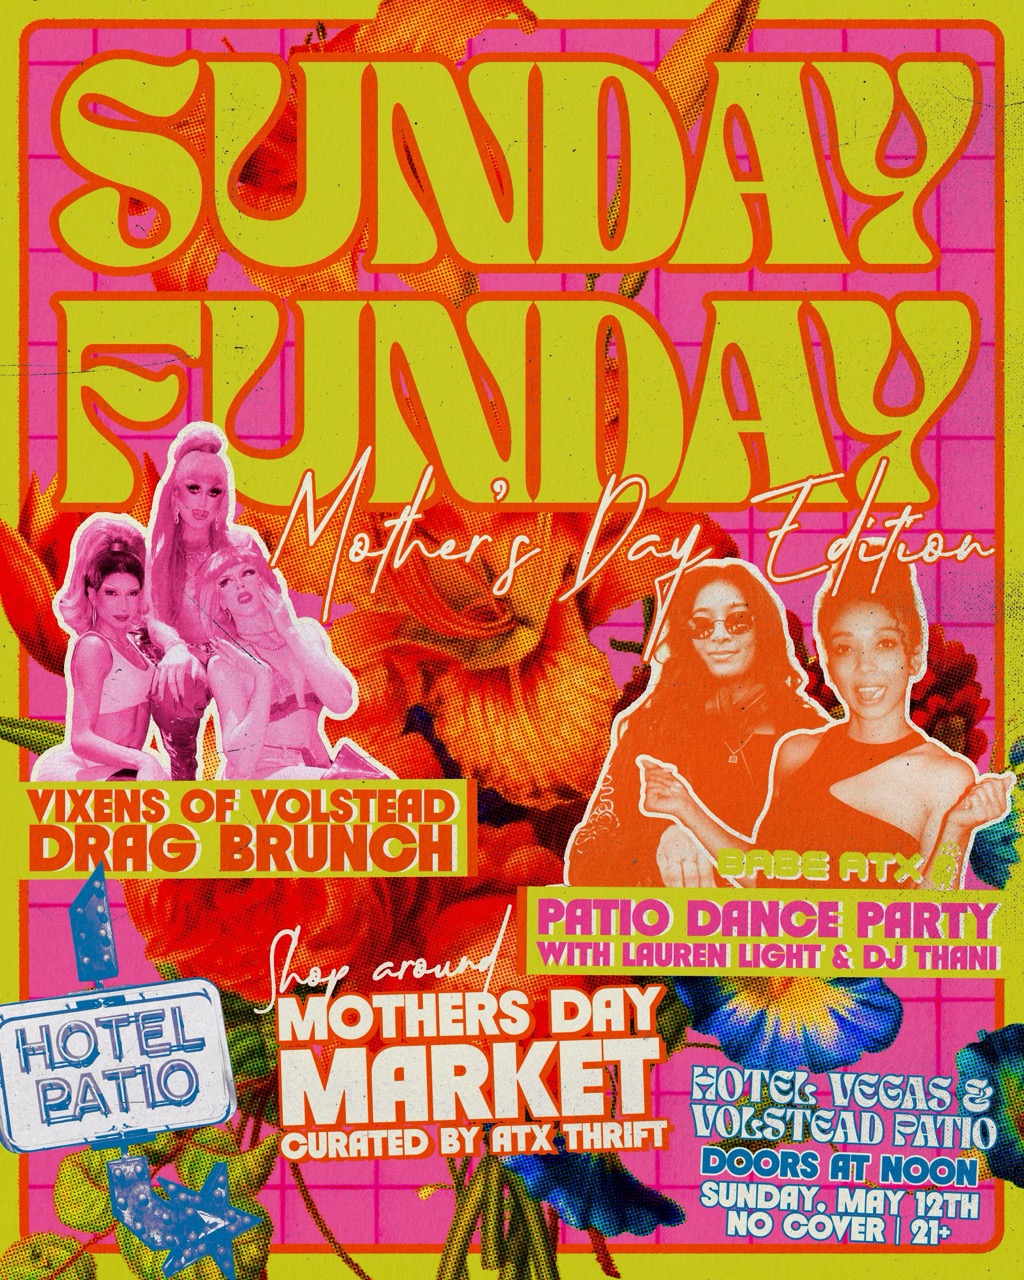 Mother's Day Sunday Funday ft. BABE ATX DJs, Vixens of Volstead, Mothers Day Market, and more! @ Hotel Vegas & Volstead Lounge